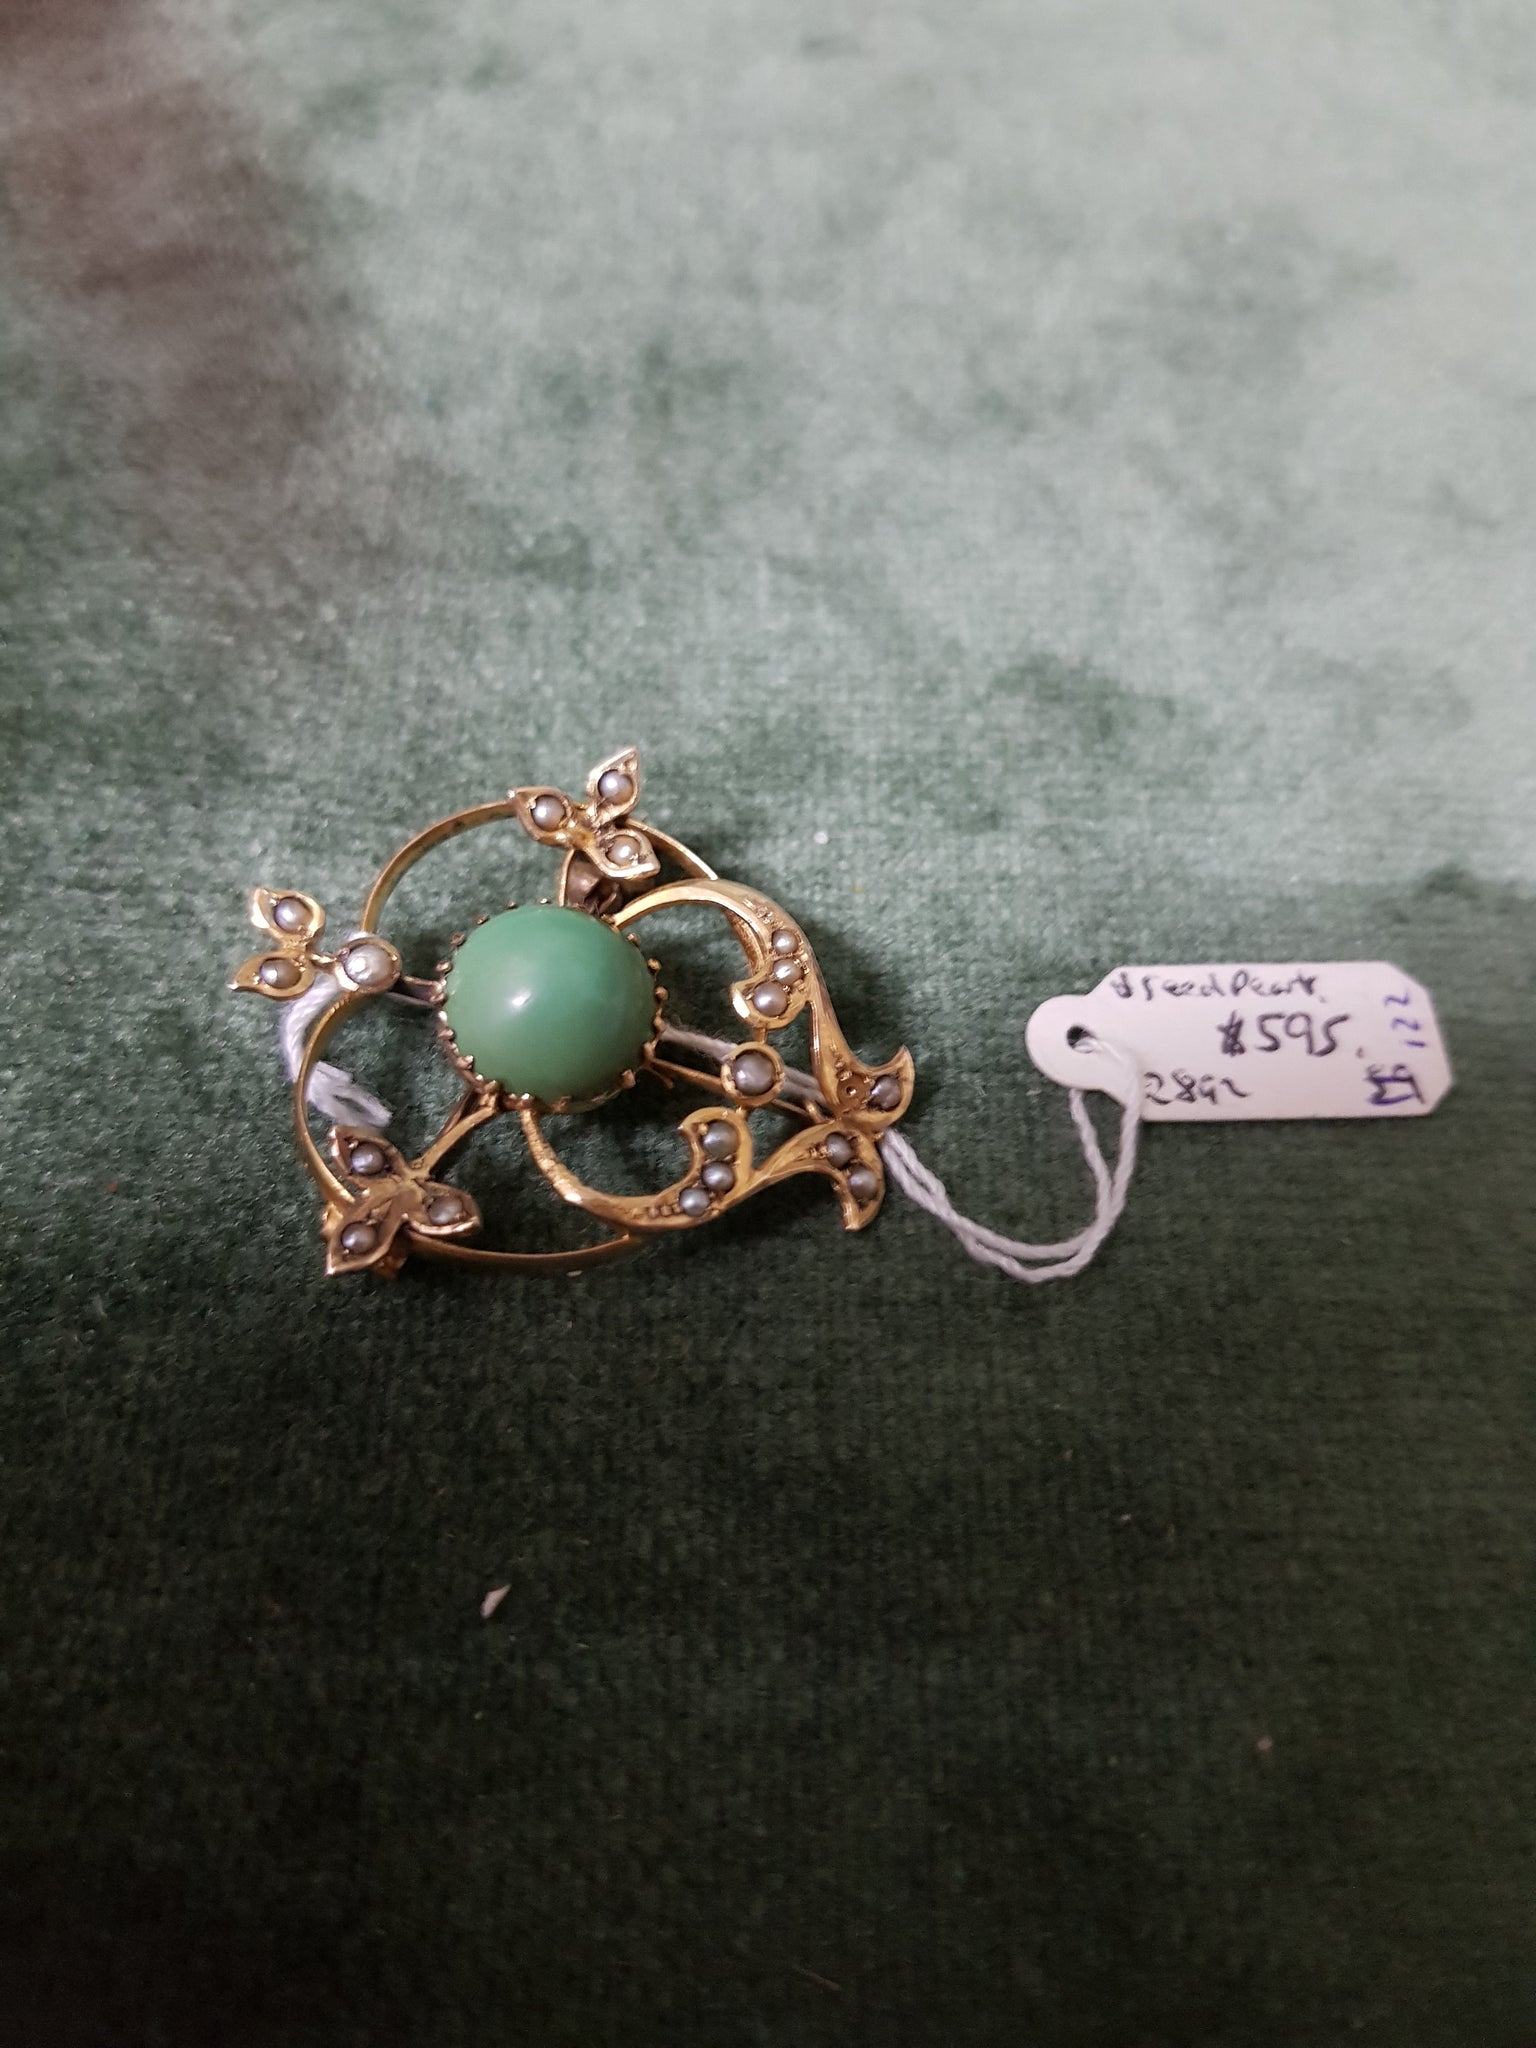 Willis and Sons MEL c1900 9ct and Chrysoprase brooch #122